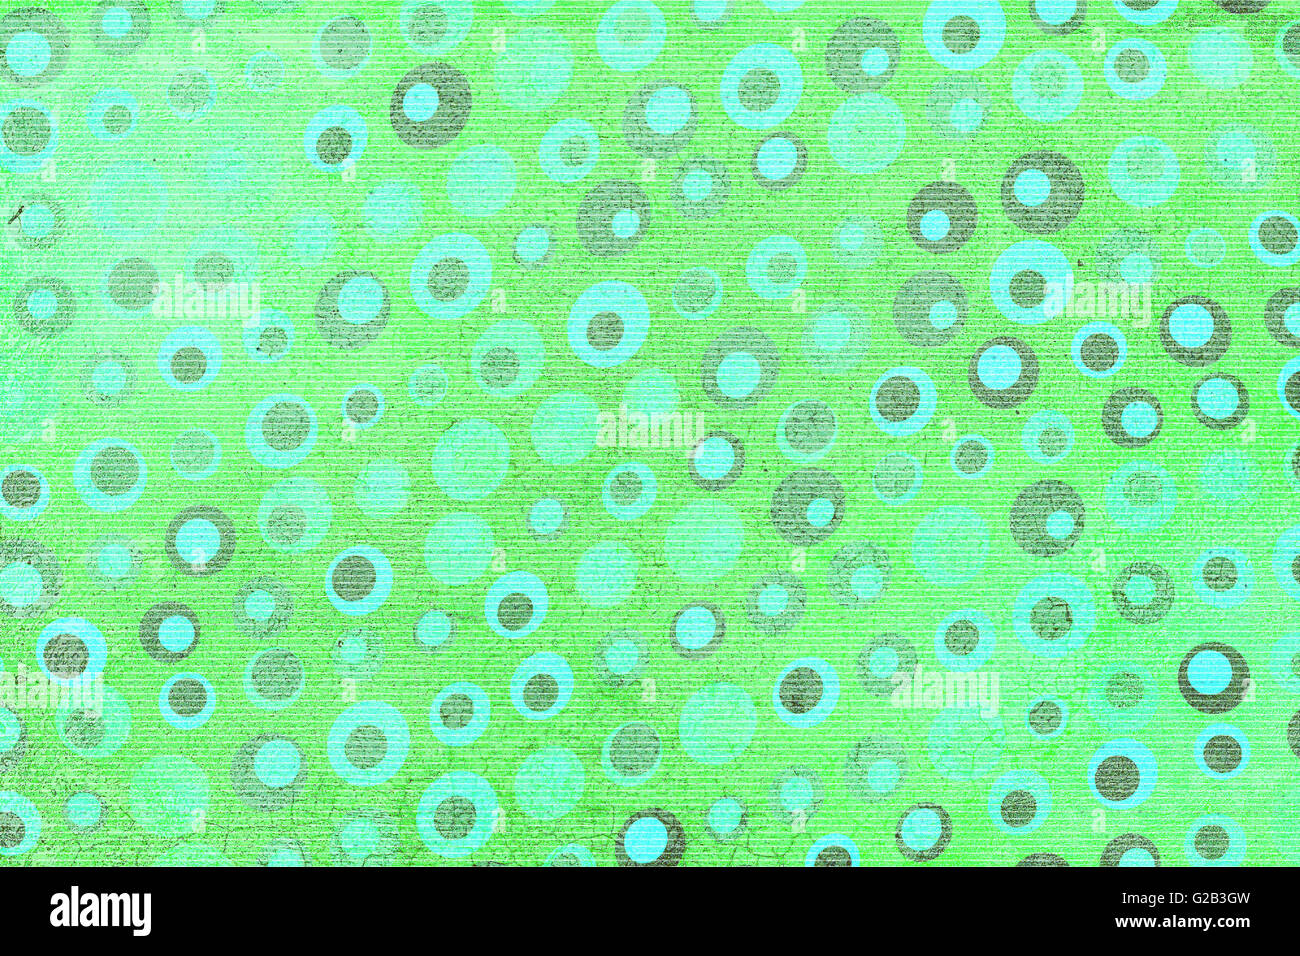 Green, blue and gray texture background with dots, circles, and lines Stock Photo